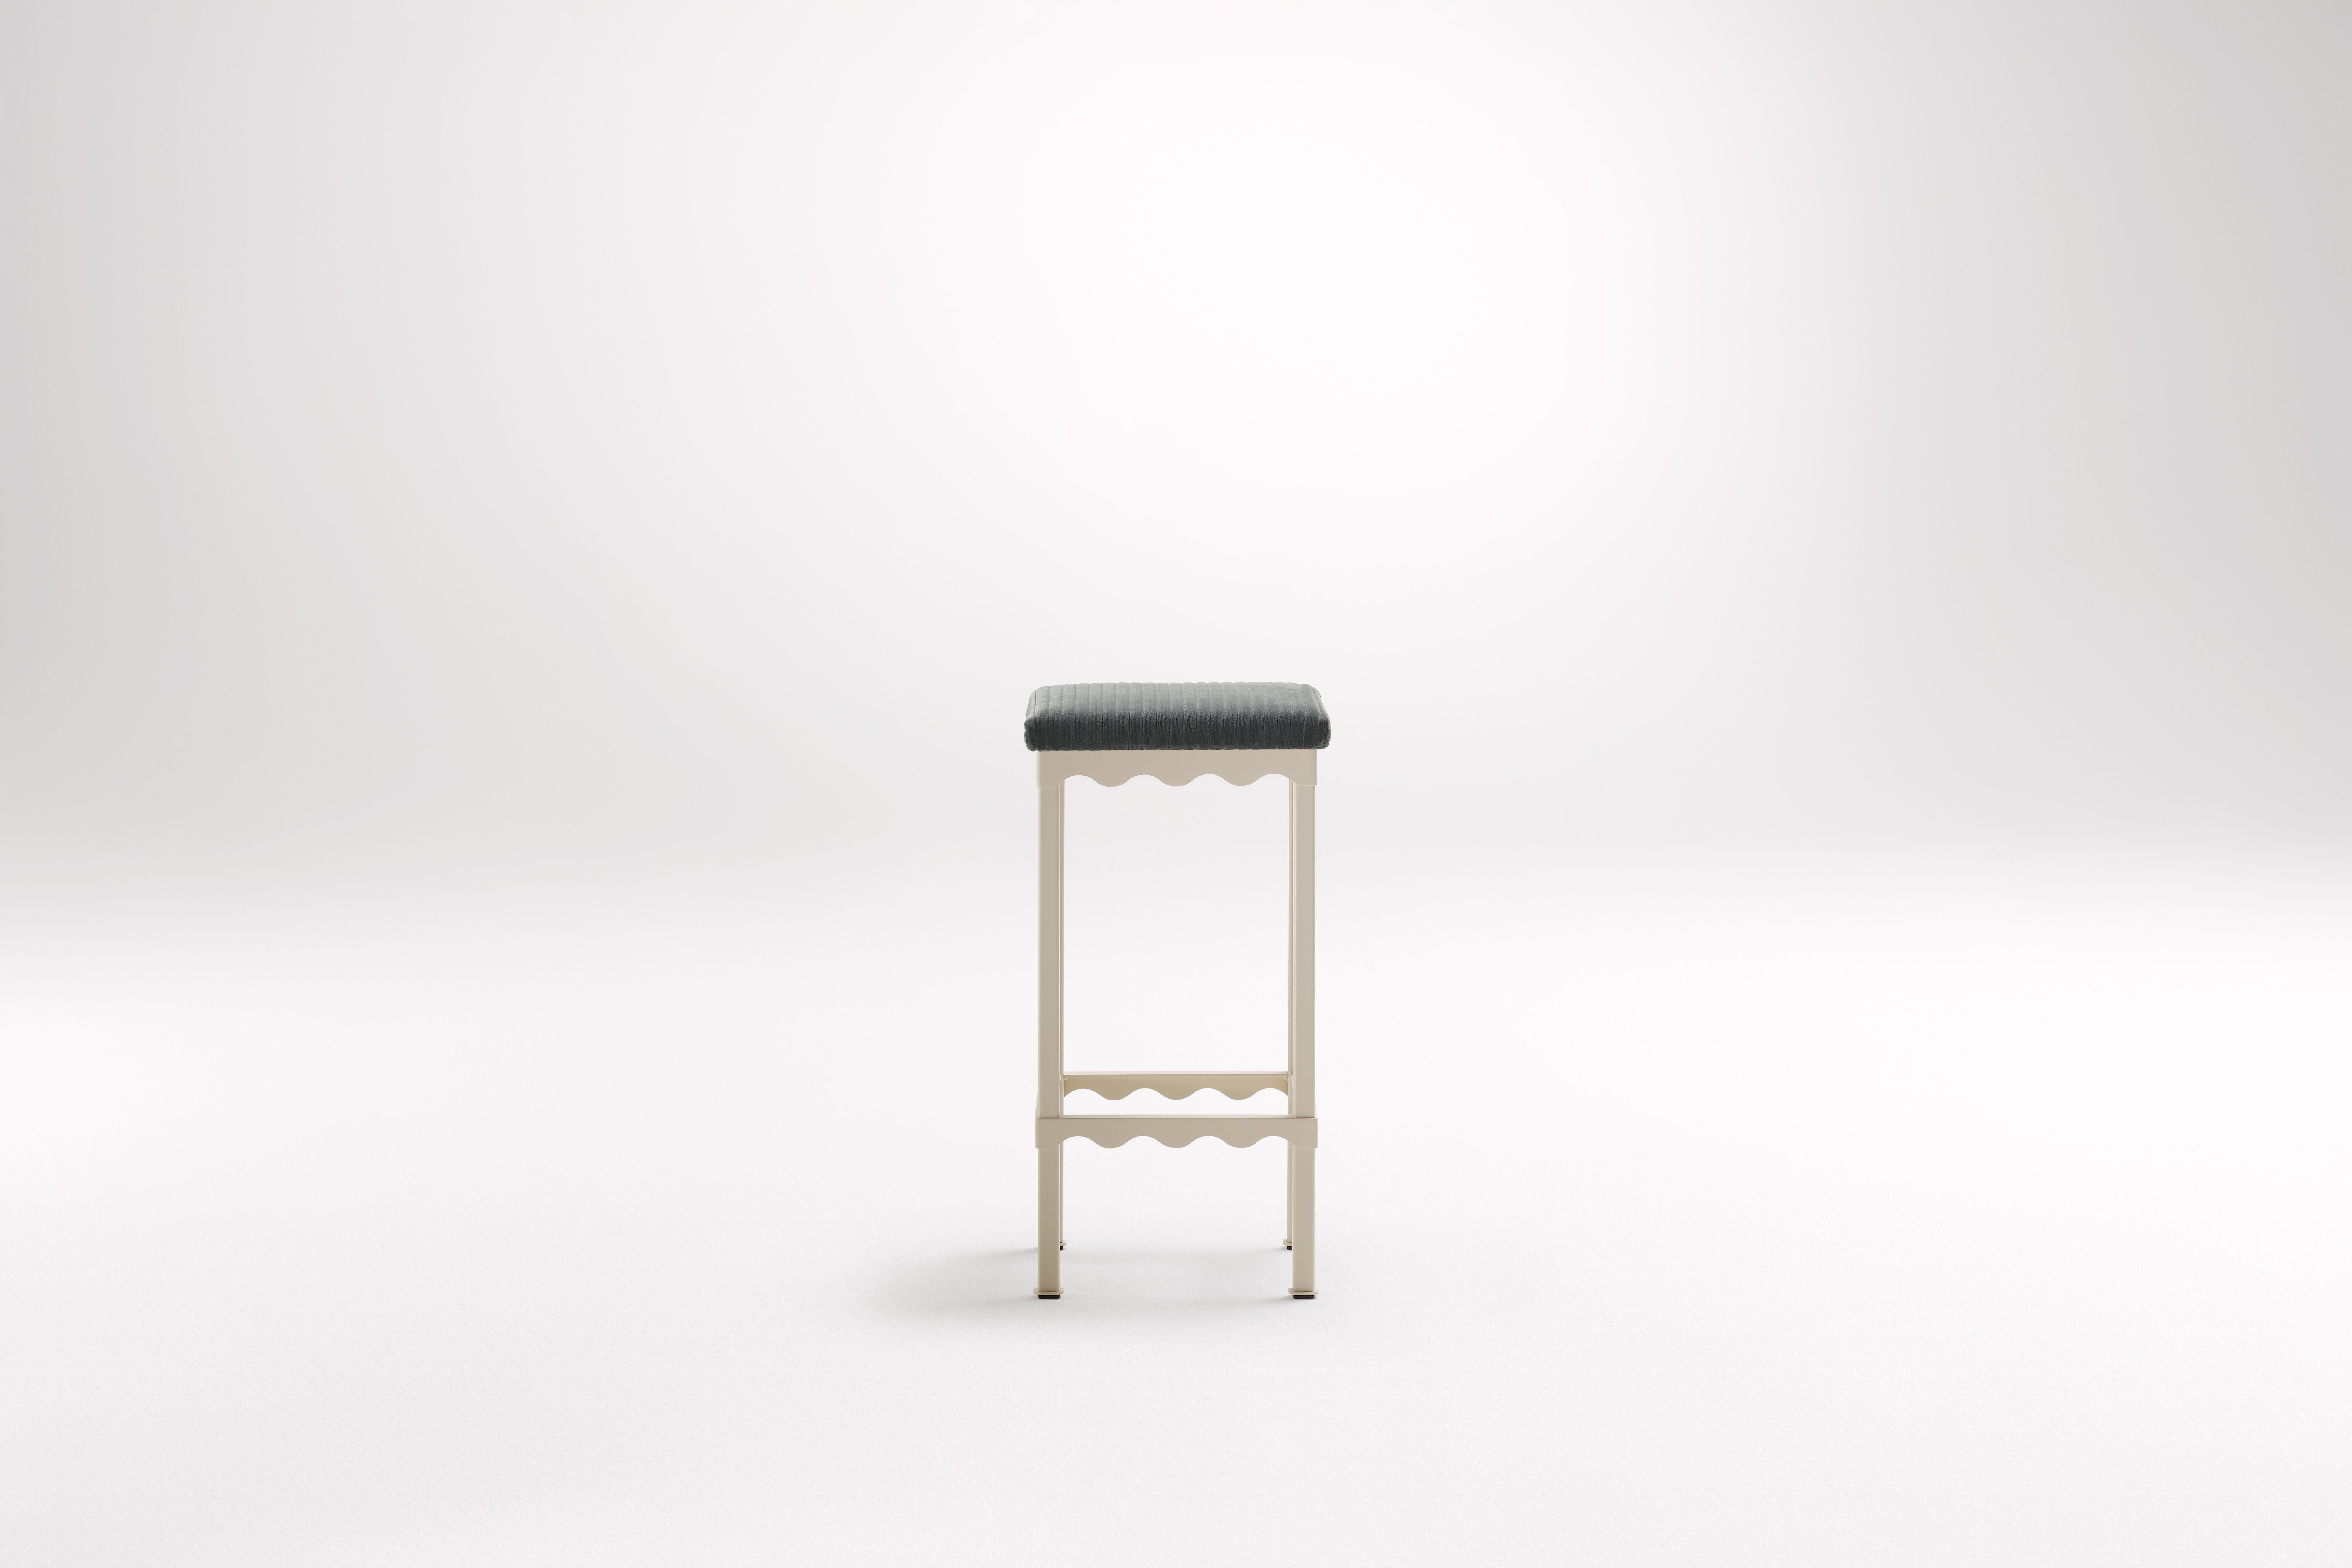 Marmoset Bellini High Stool by Coco Flip
Dimensions: D 34 x W 34 x H 65/75 cm
Materials: Timber / Stone tops, Powder-coated steel frame. 
Weight: 8kg
Frame Finishes: Textura Paperbark.

Coco Flip is a Melbourne based furniture and lighting design